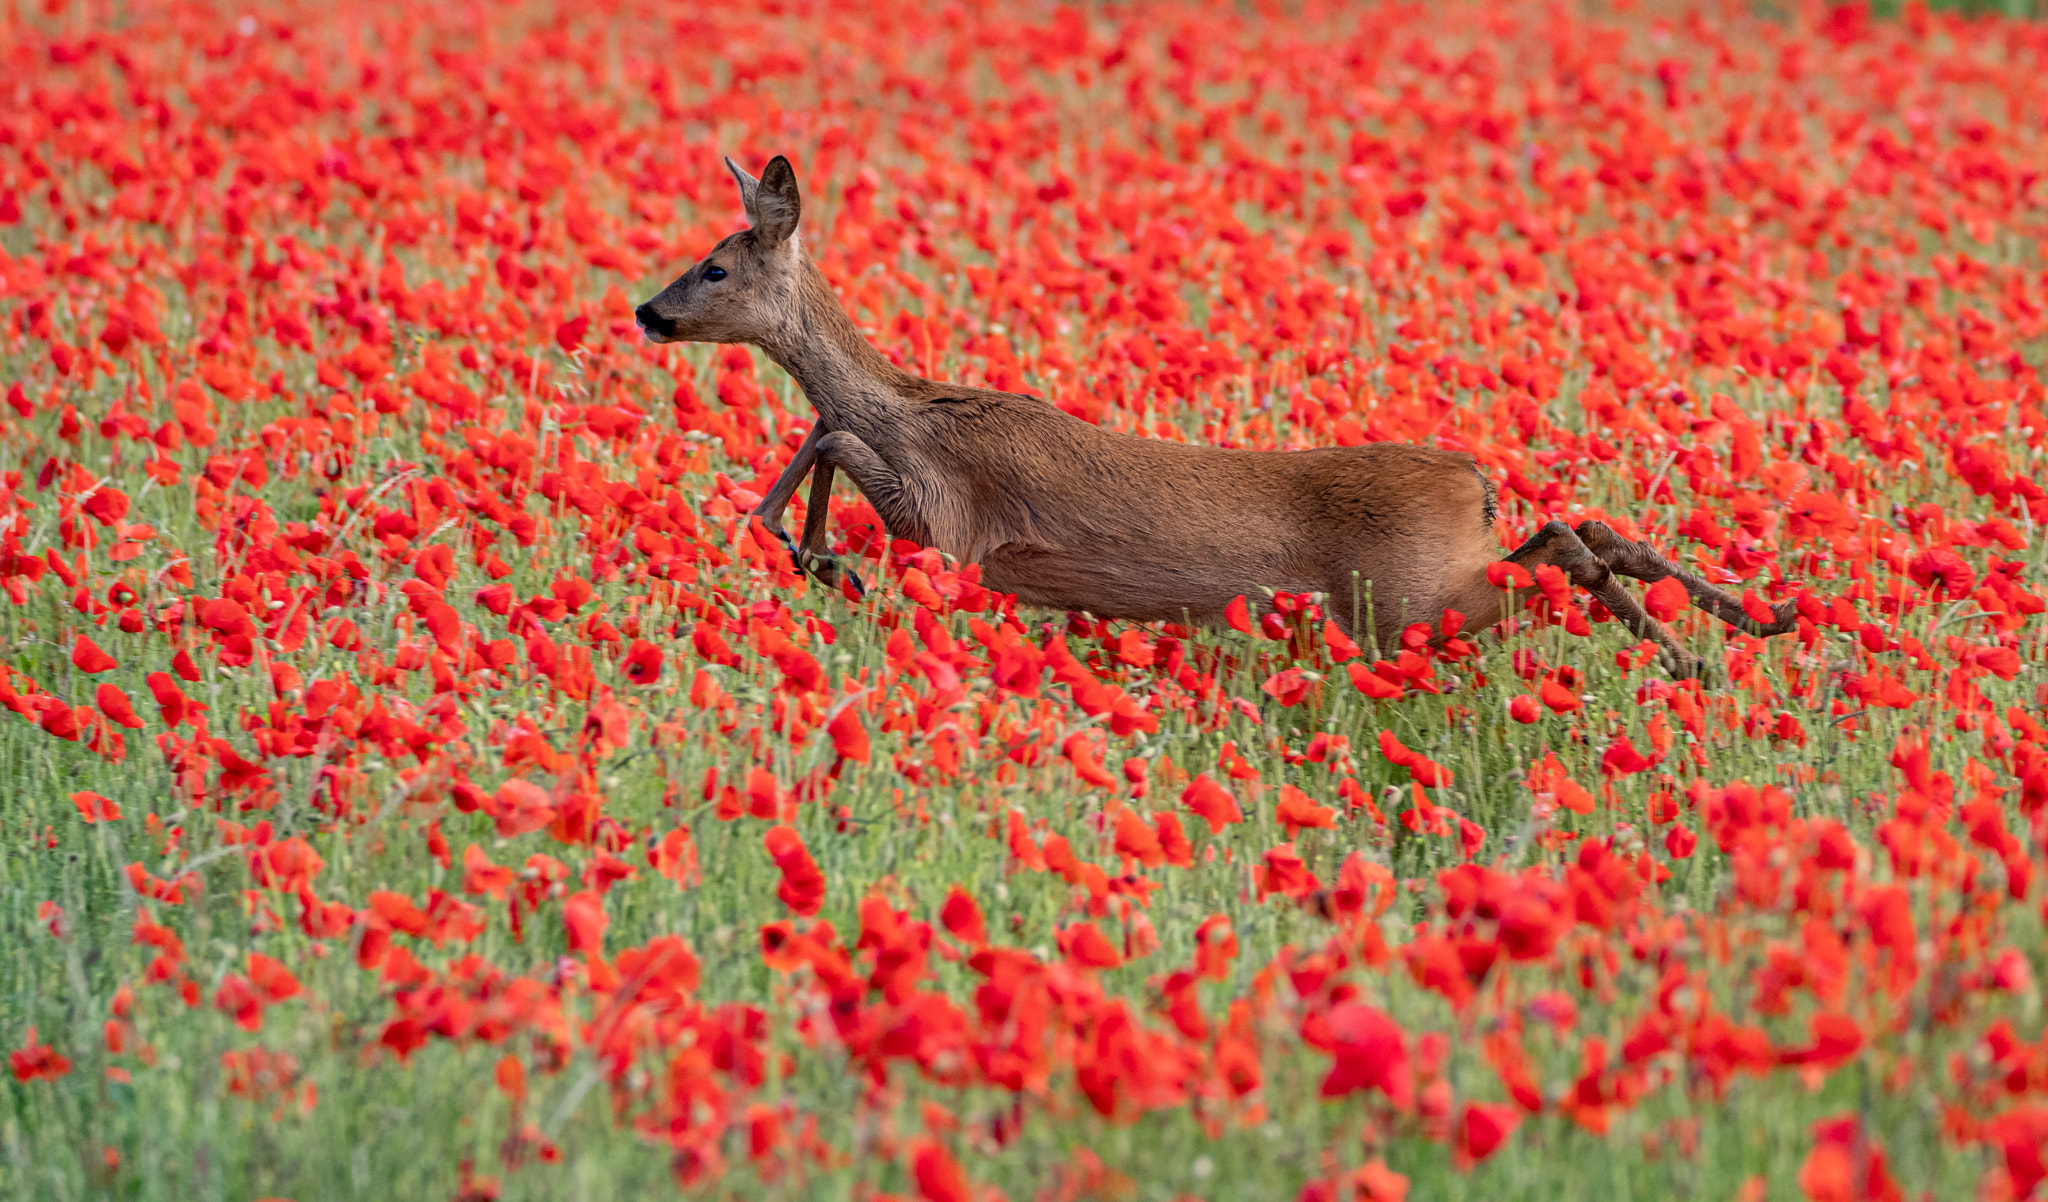 Deer in the poppies by Martin Cook on 500px.com